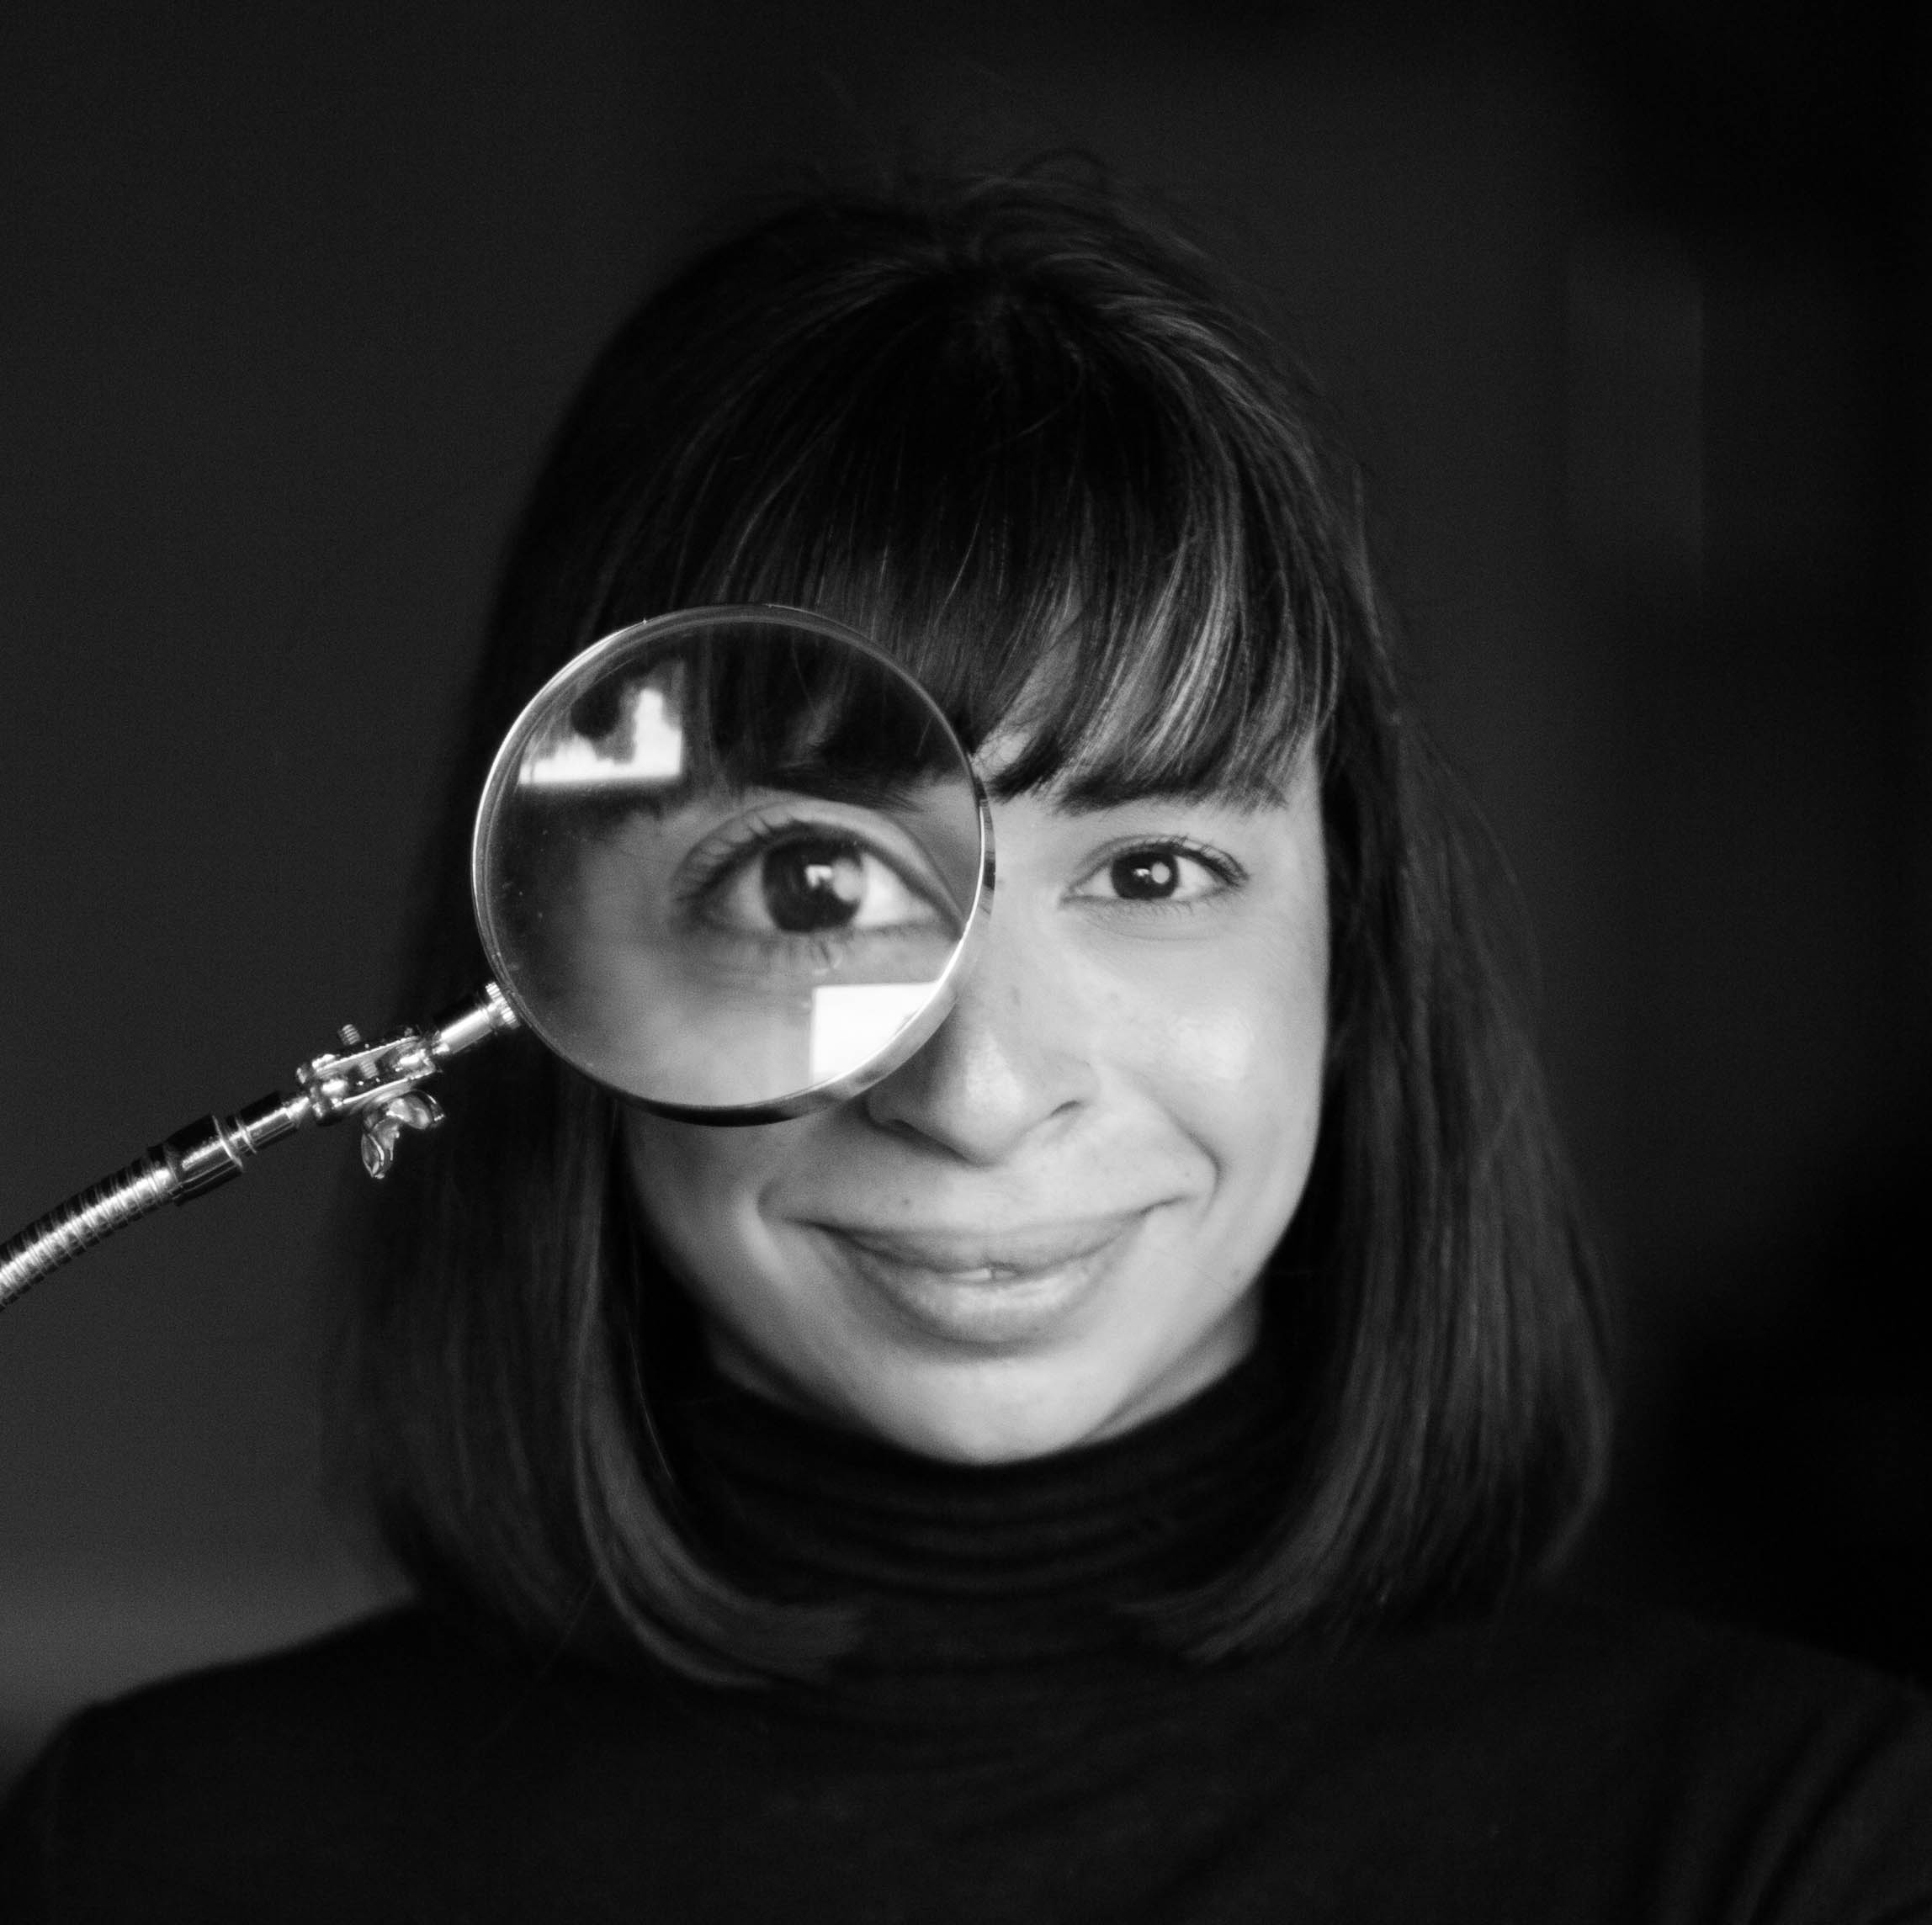 headshot of woman with dark bangs and shoulder length hair, holding a magnifying glass over one eye